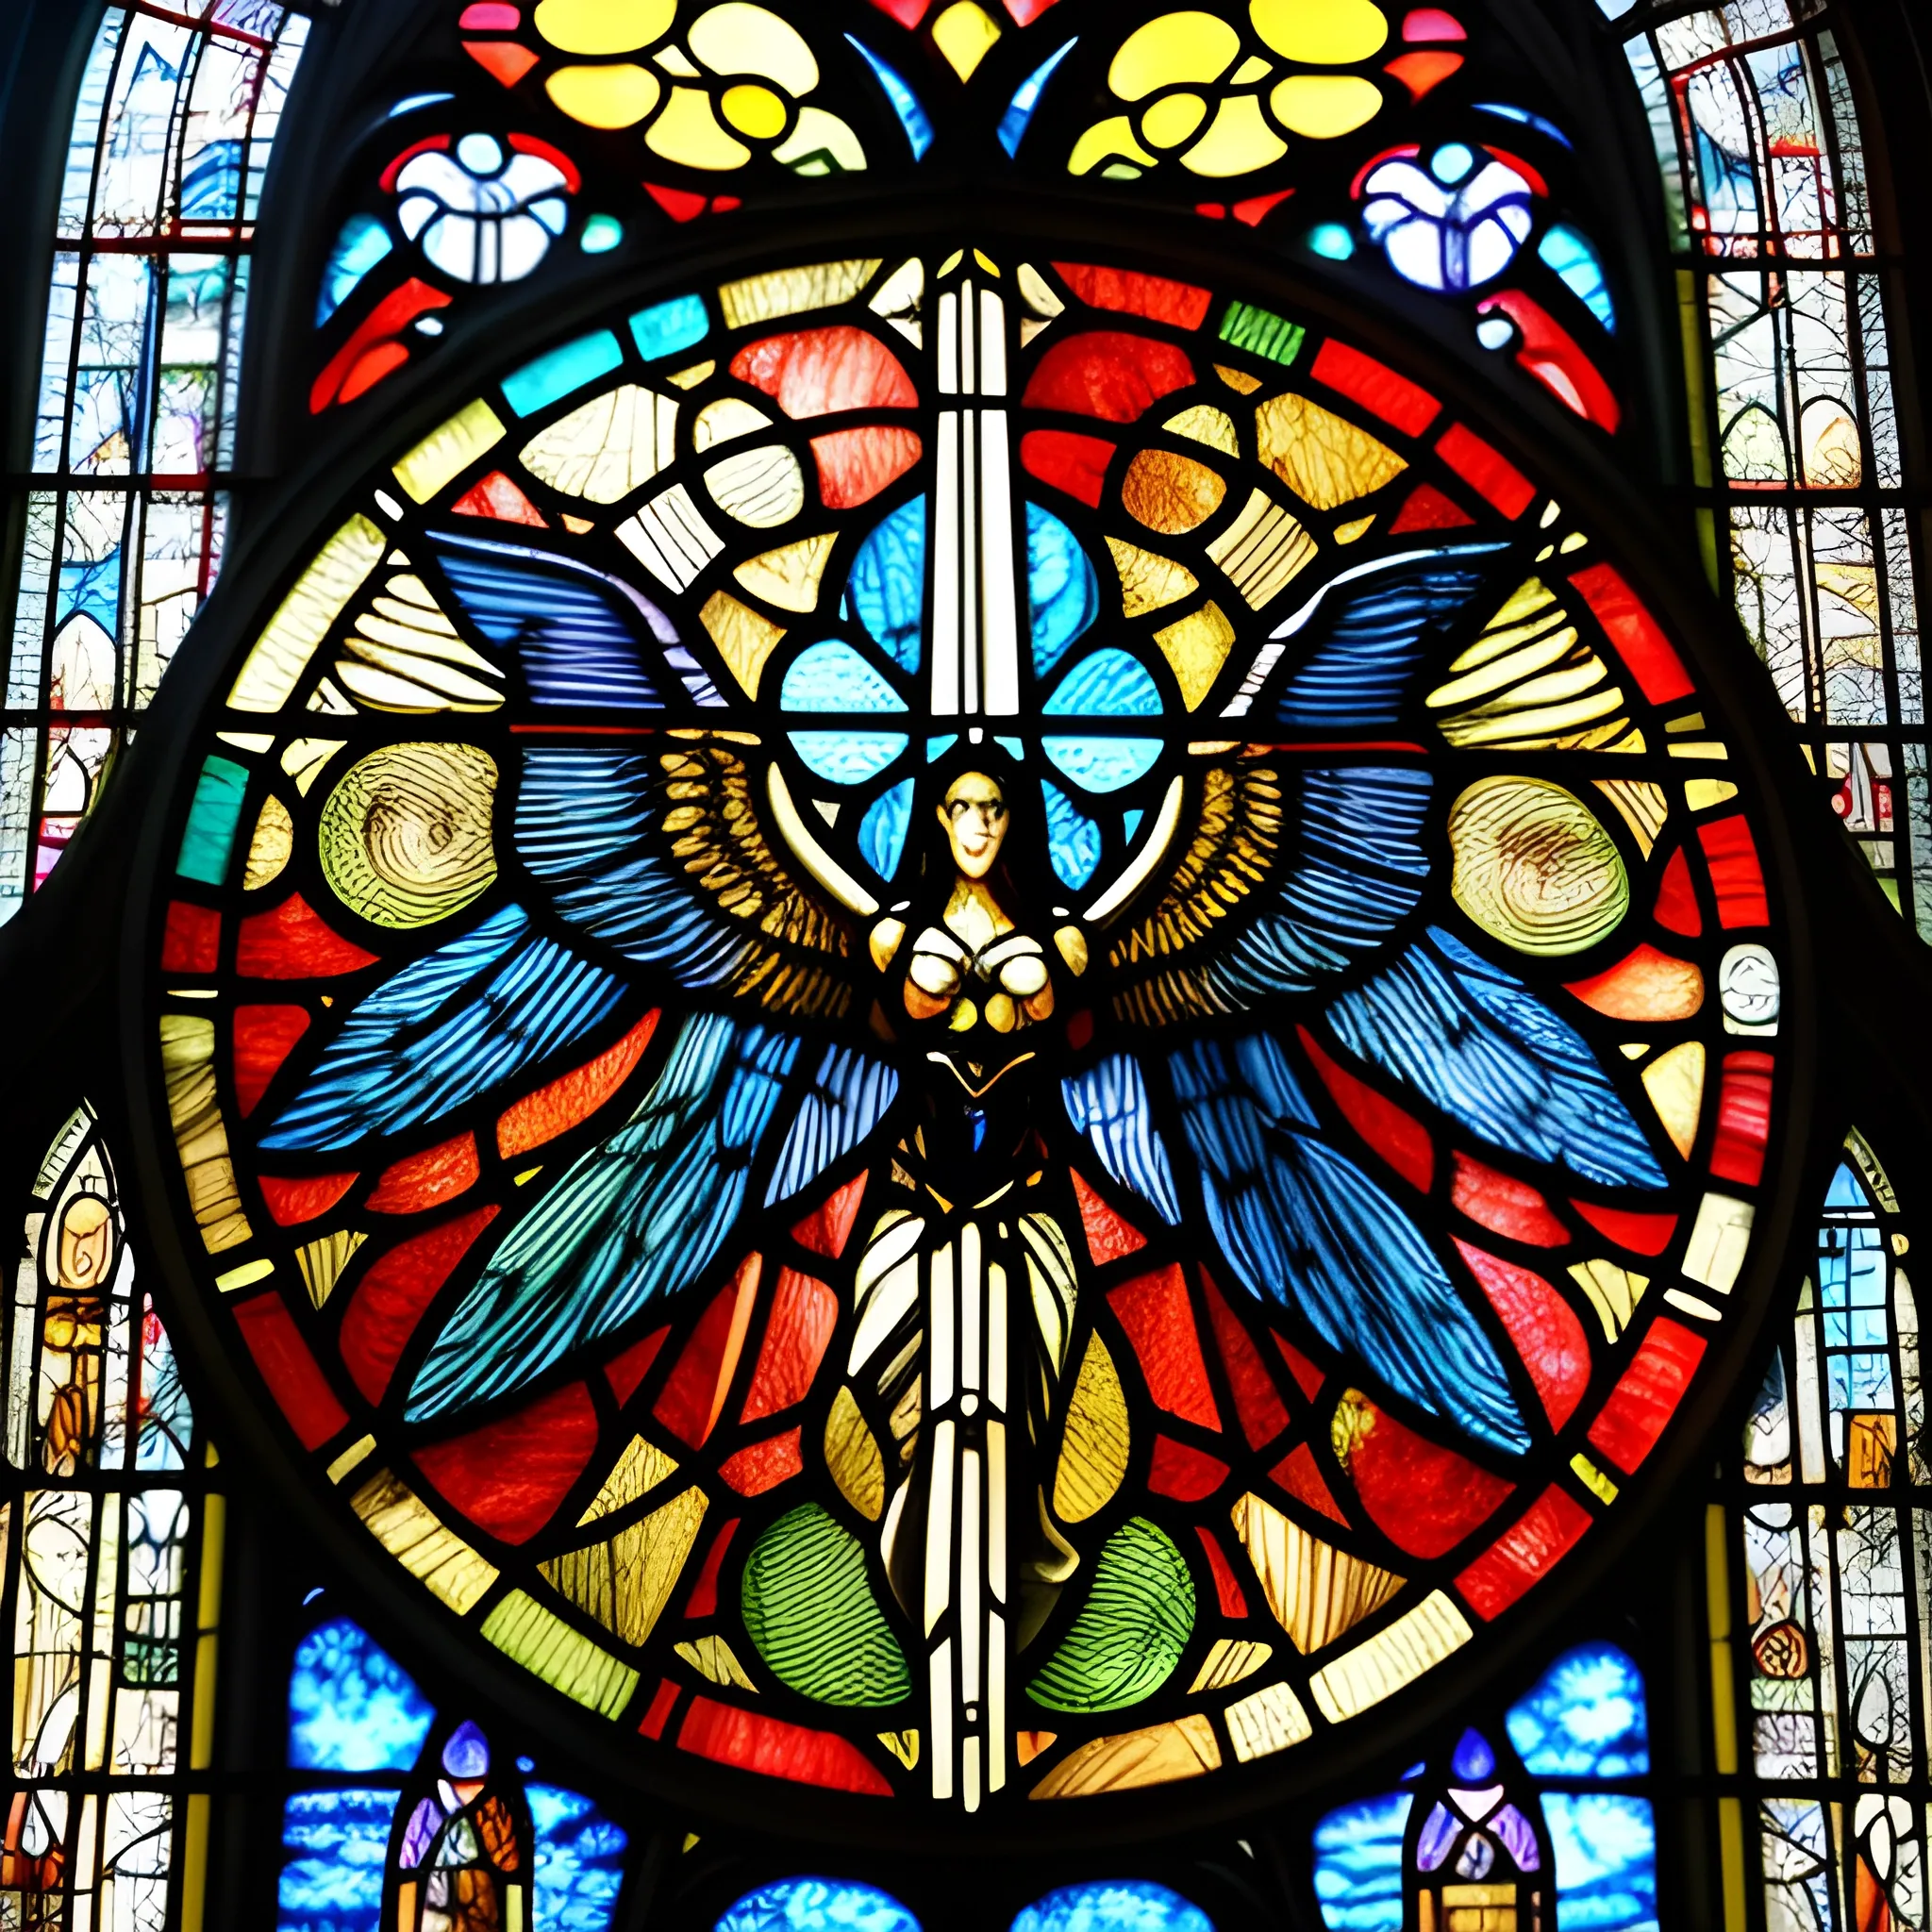 The image showcases a traditional stained glass window depicting an epic battle between an angel and a demon. The angel is portrayed with majestic, feathered wings and a halo, symbolizing purity and divinity. In contrast, the demon is characterized by dark, bat-like wings and a menacing stance, representing darkness and malevolence. They are engaged in a dramatic sword fight, at the center of which is a bright burst of light, possibly indicating the clashing of their weapons.

The stained glass window is intricately detailed, with a rich palette of colors. The upper portion of the window displays symmetrical designs with a variety of vibrant colors that resemble flames, suggesting the intensity of the heavenly battle. Below the figures, the chaos of battle continues with a depiction of numerous human figures engaged in their own struggle, adding to the scene's dynamic nature.

The overall composition is symmetrical and balanced, with the angel and demon positioned as mirror images of each other, reinforcing the theme of the eternal struggle between good and evil. The background of the window is a complex array of cloud-like formations, providing a sense of depth and movement to the celestial scene above.

The lower part of the window serves as a narrative foundation, grounding the heavenly conflict in the mortal realm, perhaps implying that the outcomes of such cosmic battles have direct consequences on the human condition. The craftsmanship of the stained glass, with its leaded divisions and varying textures and hues, contributes to a sense of grandeur and historical significance.